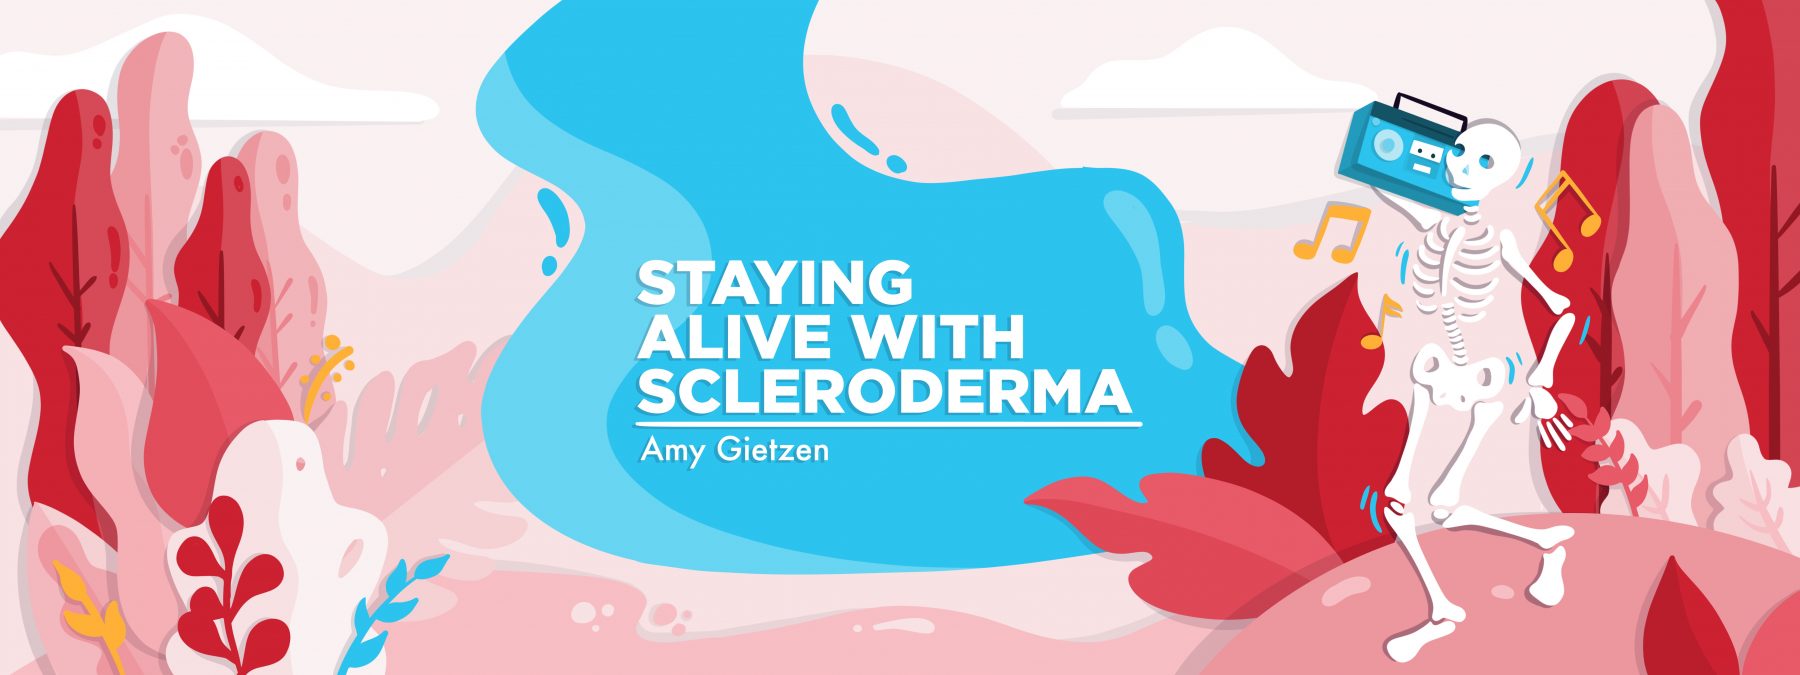 comprehensive care | Scleroderma News | diagnosis | banner image for 